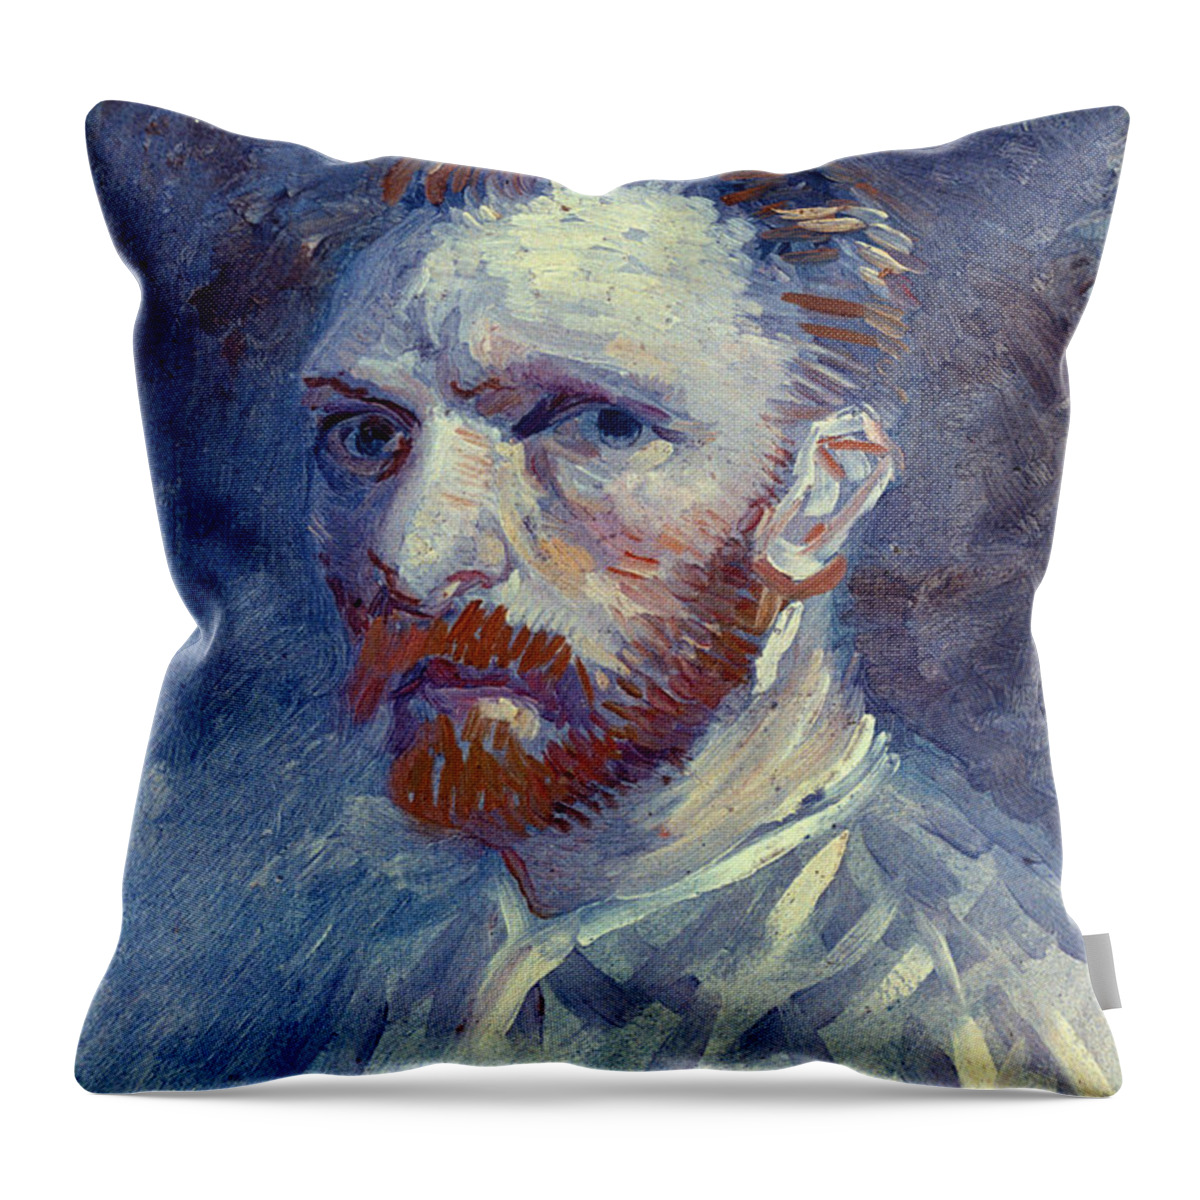 1887 Throw Pillow featuring the photograph Vincent Van Gogh by Granger